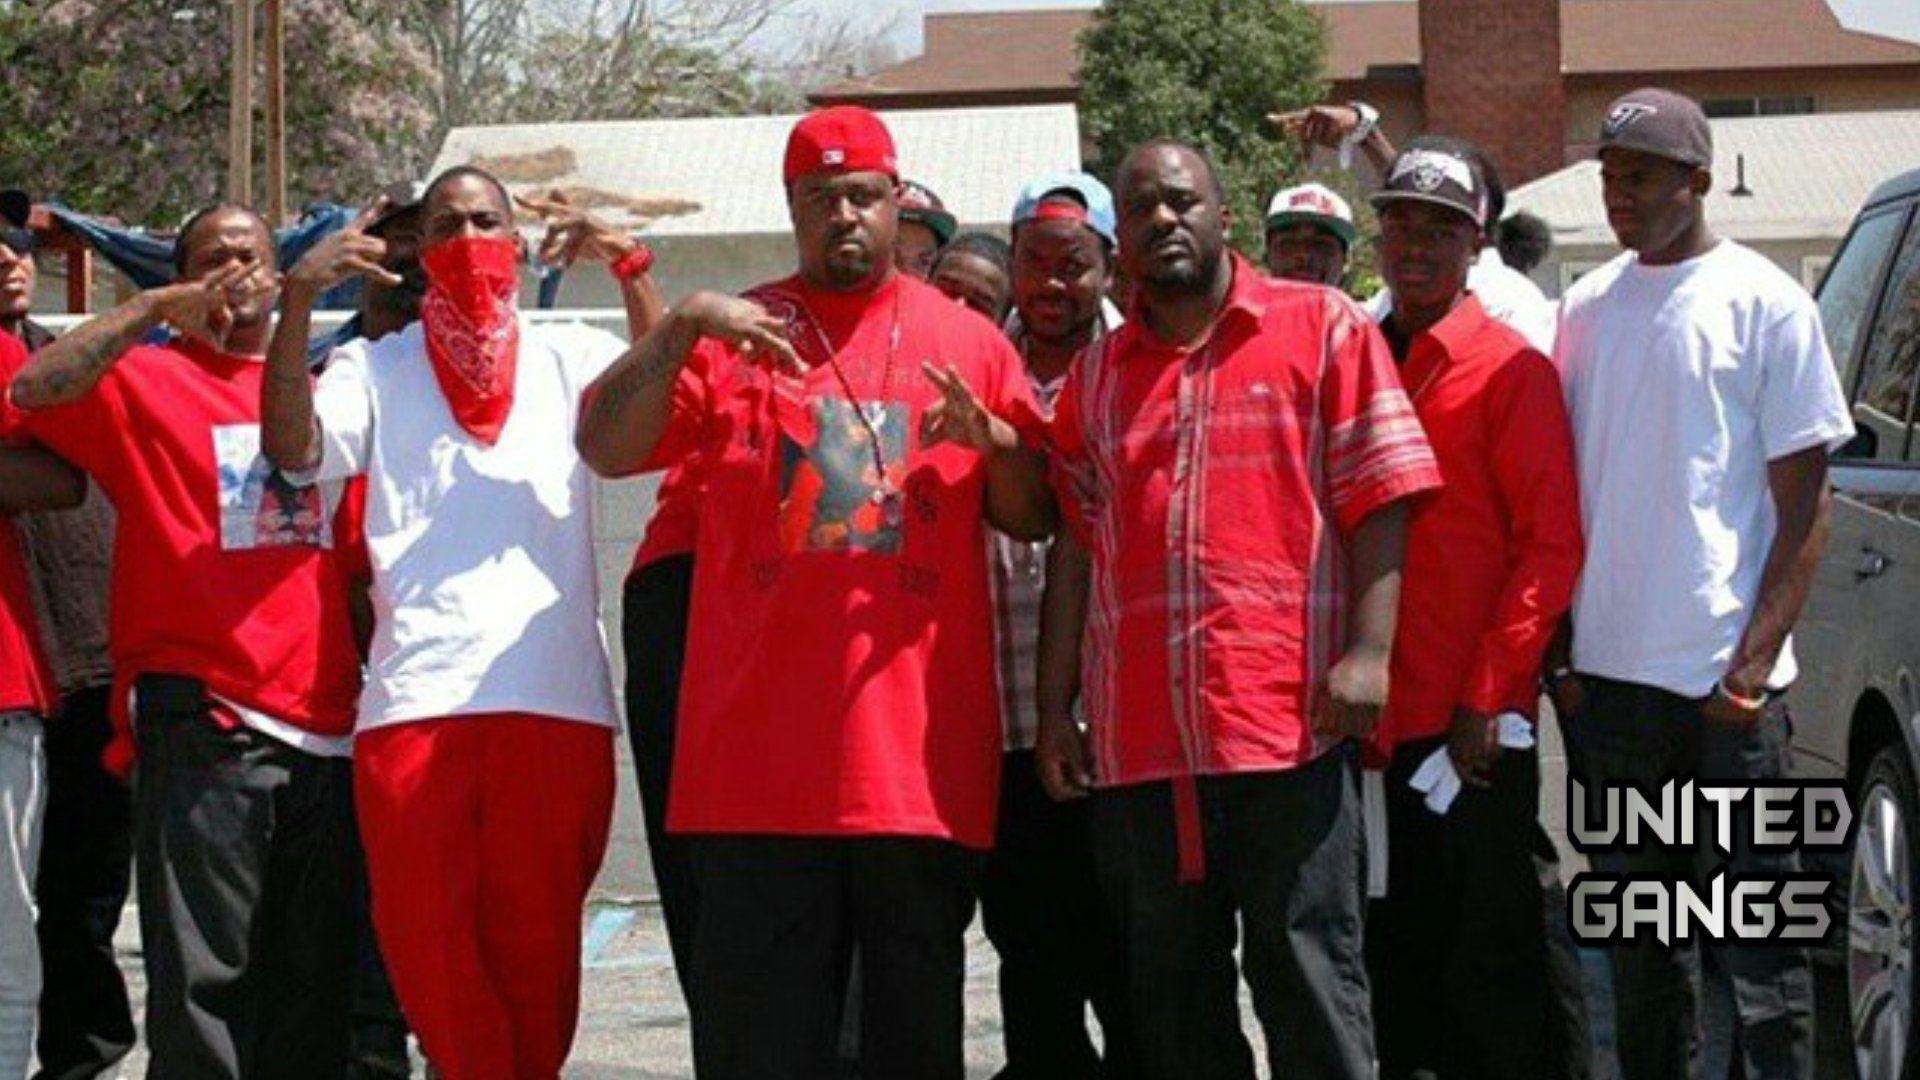 The bloods gang